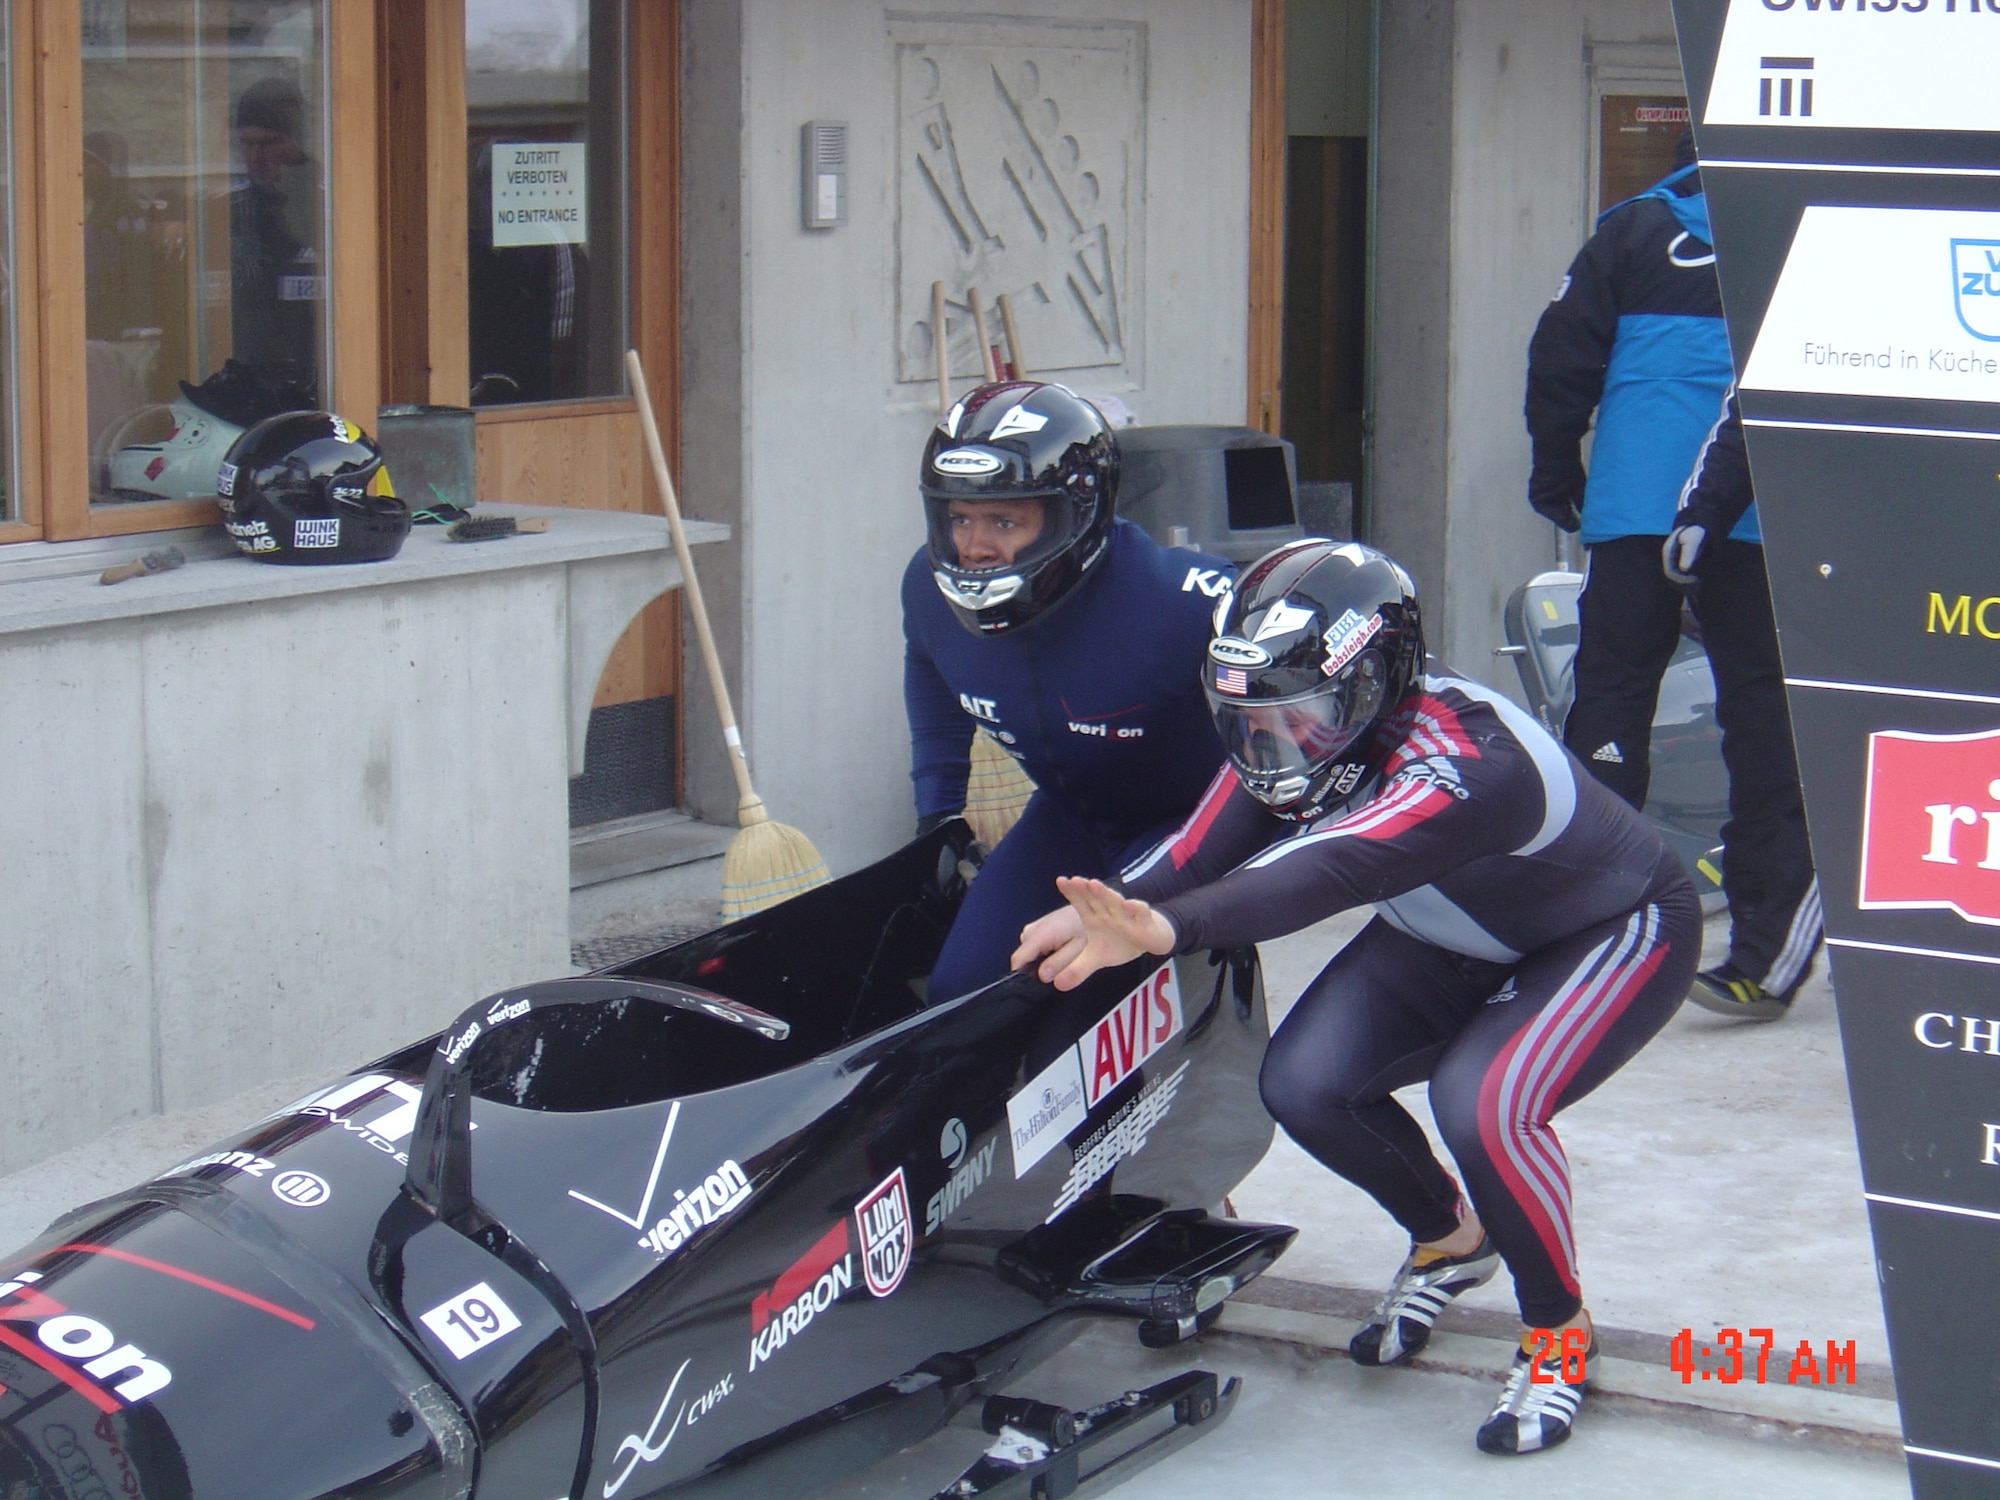 Tech Sgt. Hoy Thurman (left), a surveillance radar technician in the 116th Air Control Wing, will compete in many bobsled events like this one in Park City, Utah, in an effort to make the U. S. 2010 Olympic bobsled team. Courtesy photo       